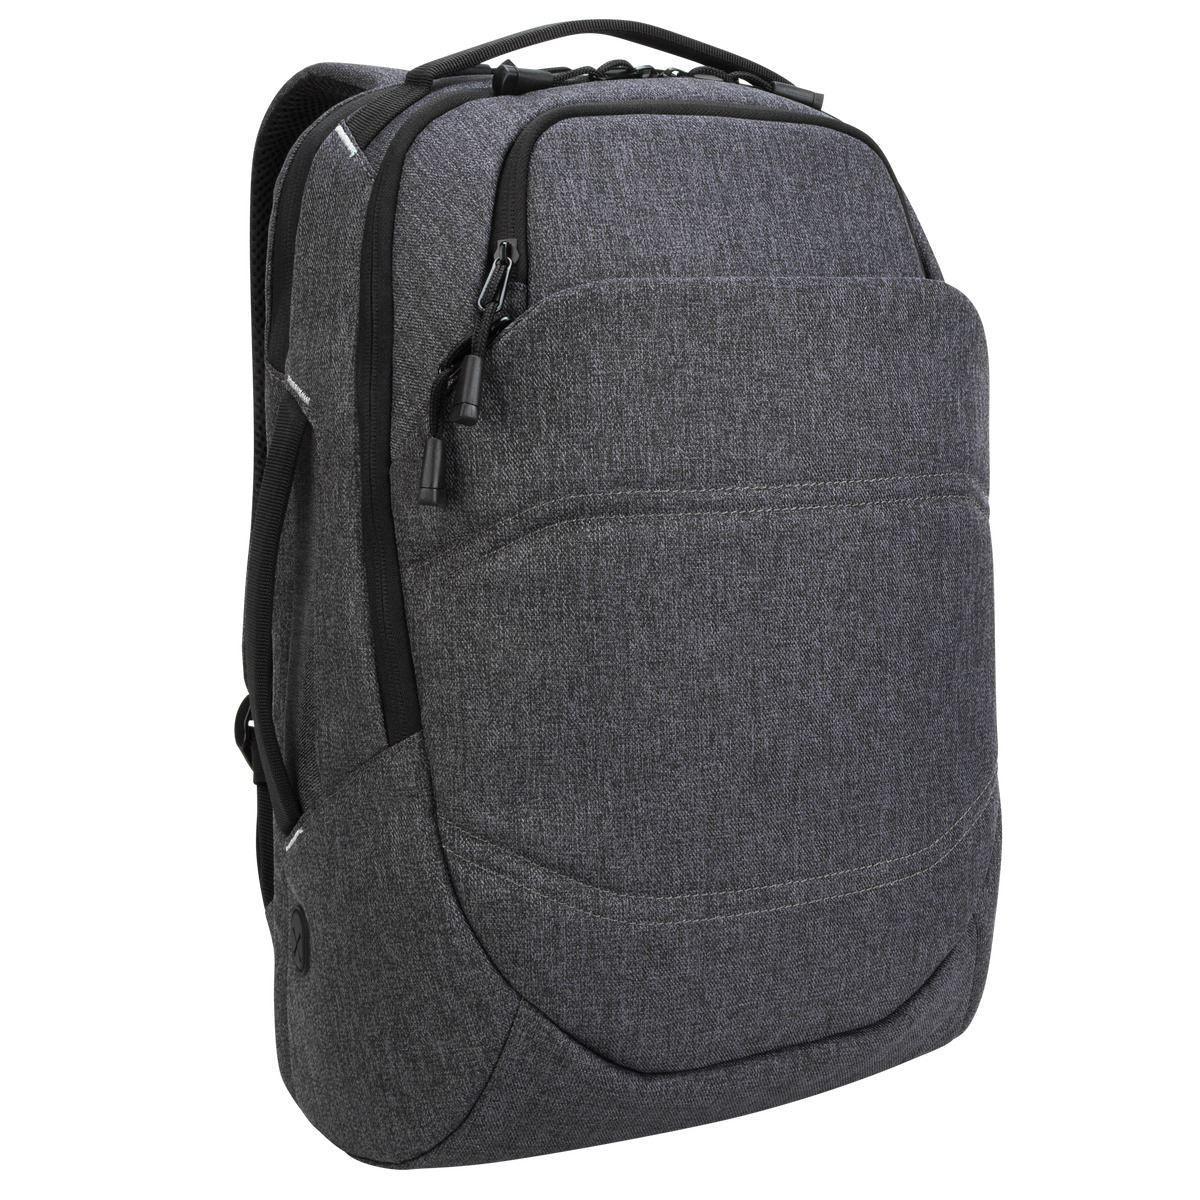 Groove X2 Max Backpack designed for MacBook 15” & Laptops up to 15” (C ...